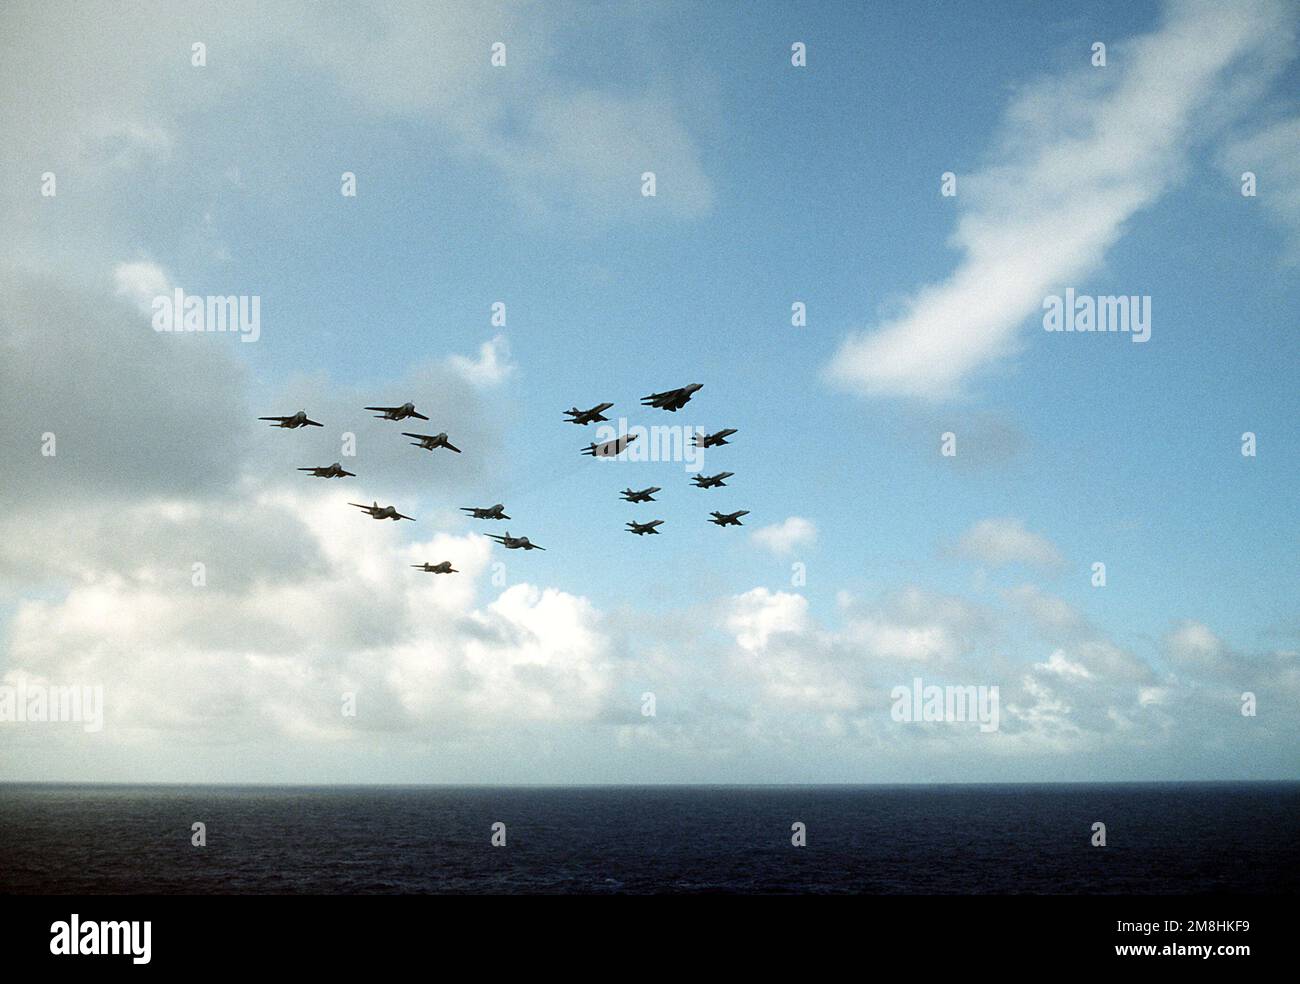 A view of a formation of aircraft assigned to Carrier Wing Eleven (CVW-11) during a fly-by past the nuclear-powered aircraft carrier USS ABRAHAM LINCOLN (CVN-72) as part of a fire power demonstration. The units involved are Attack Squadron 95 (VA-95). Tactical Electronic Warfare Squadron 135 (VAQ-135), Fighter Squadron (VF-213), Strike Fighter Squadron 22 (VFA-22), Strike Fighter Squadron 94 (VFA-94), Marine Strike Fighter Squadron 314 (VMFA-314) and Air Anti-Submarine Squadron 29 (VS-29). Country: Western Pacific Stock Photo